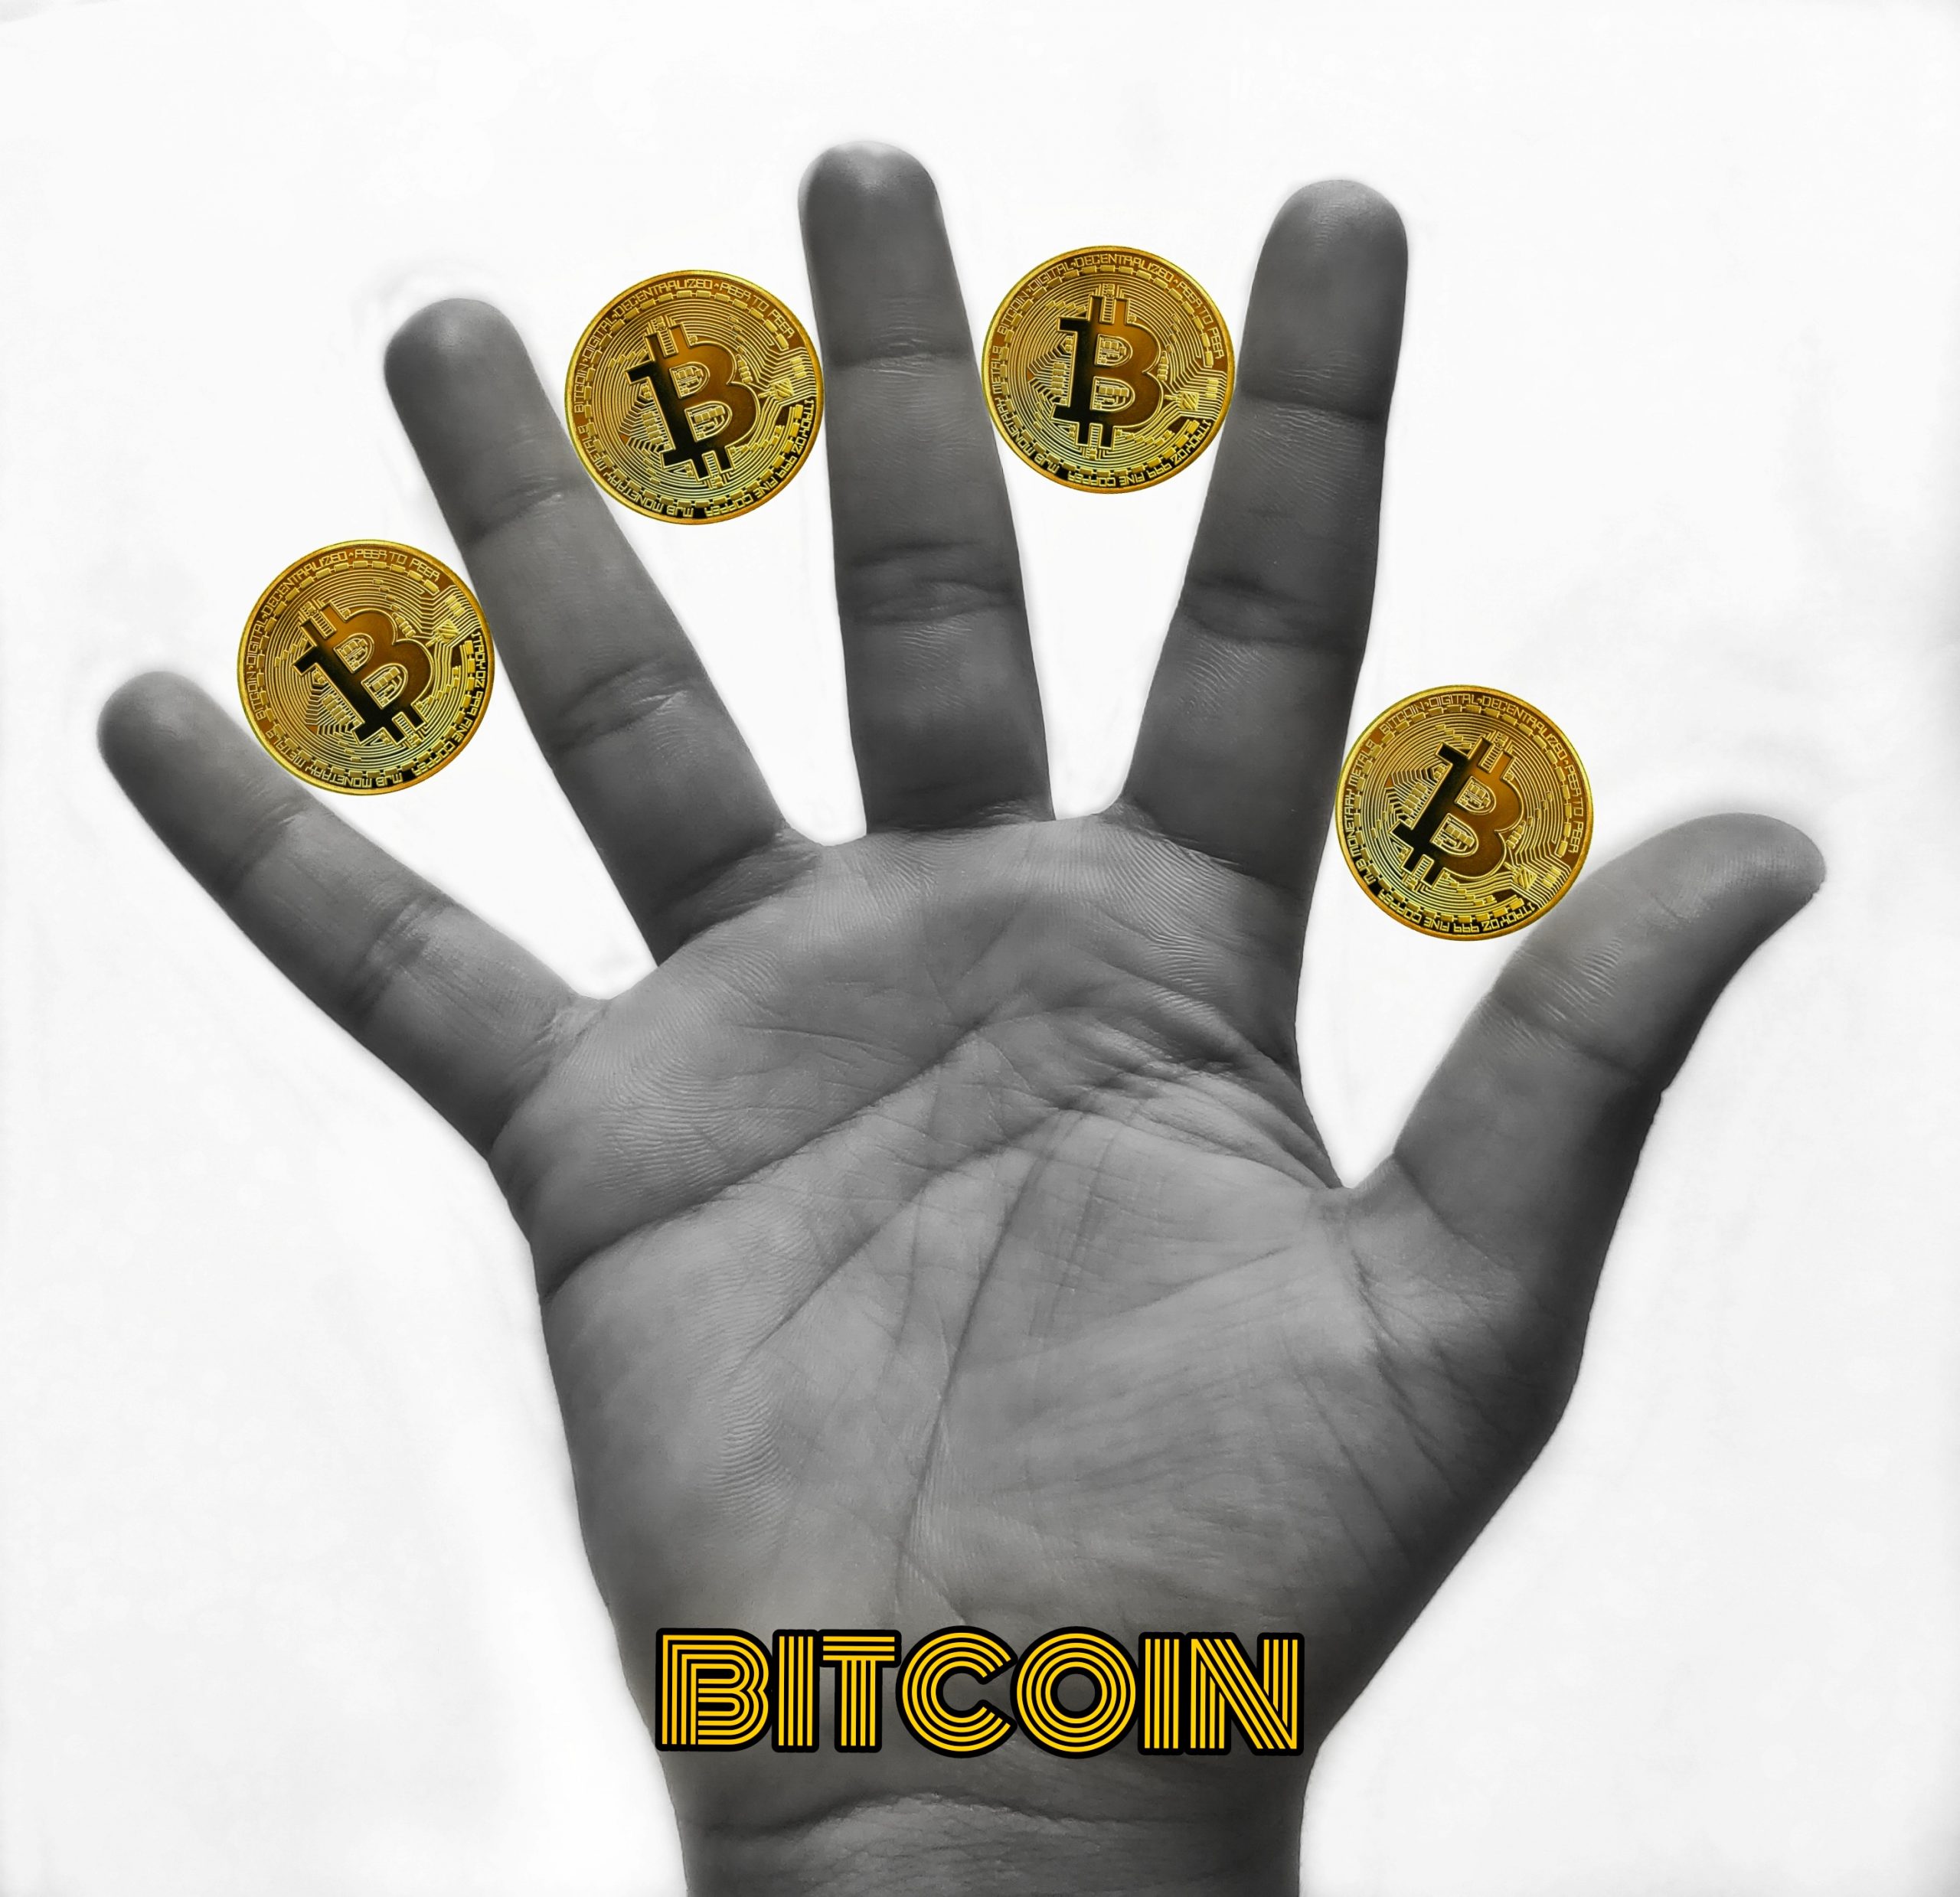 Bitcoin stickers used and highlighted